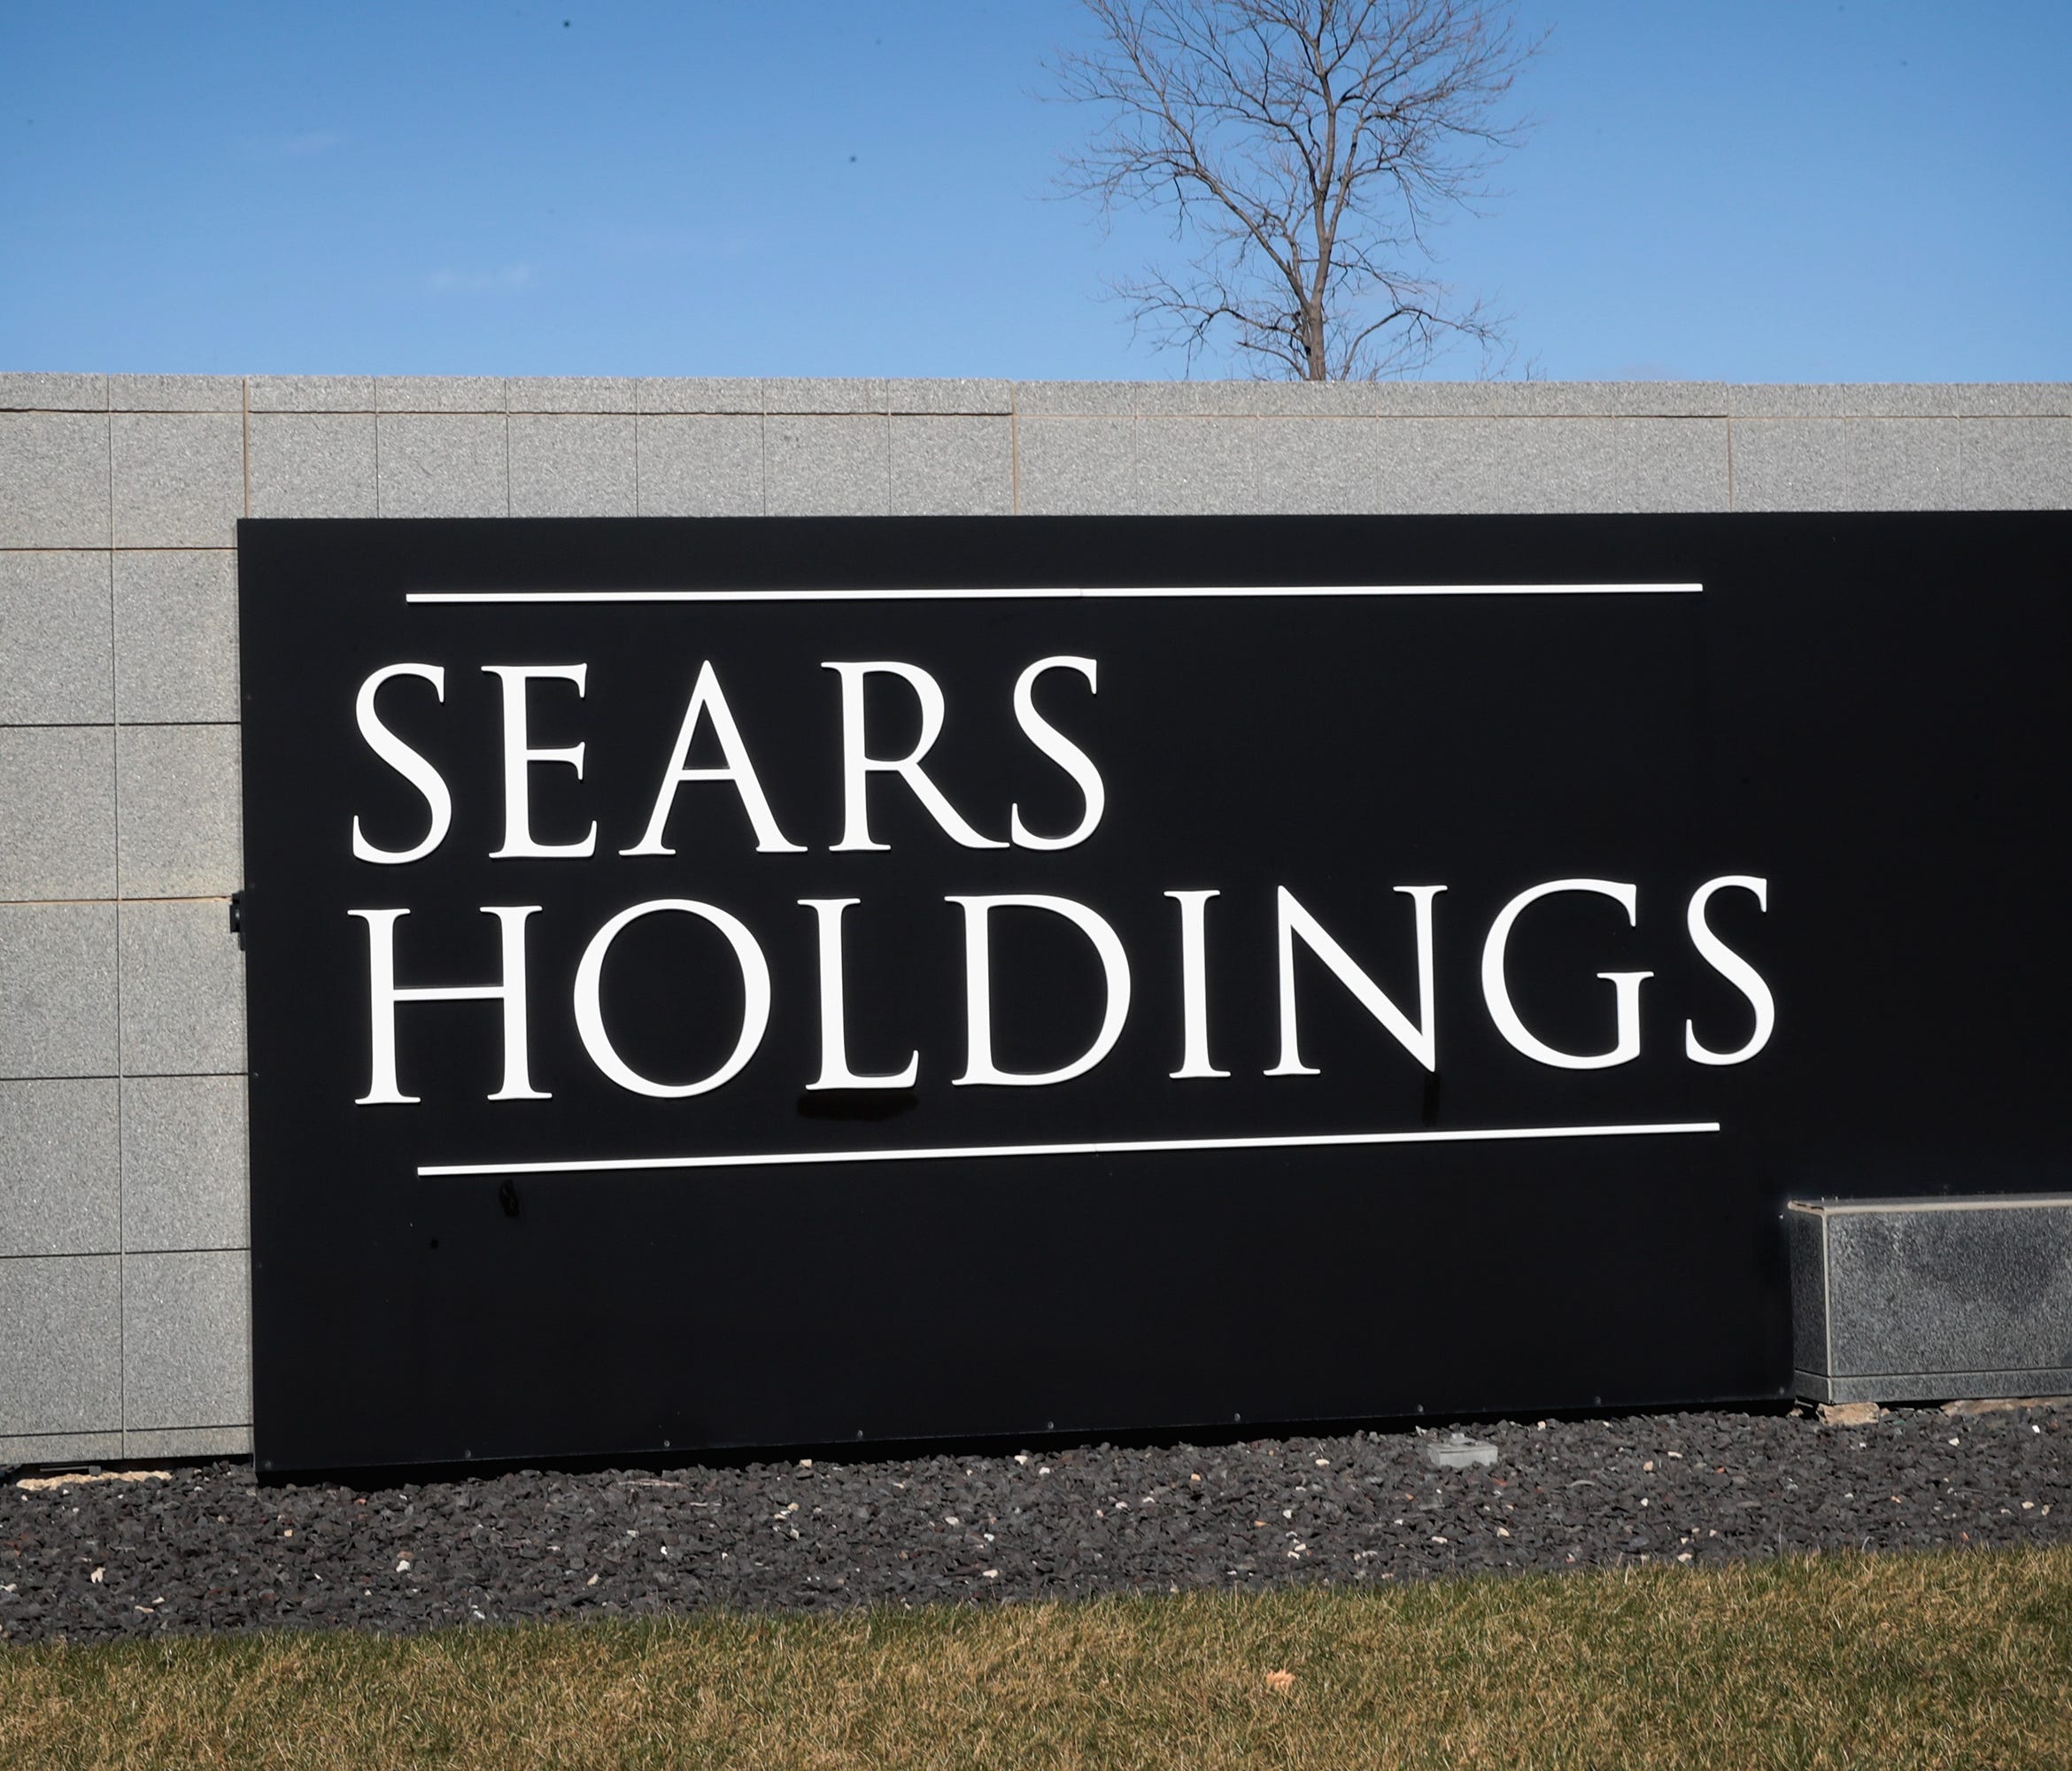 File photo taken in 2017 shows a sign at the edge of the Sears Holdings headquarters campus in Hoffman Estates, Illinois.